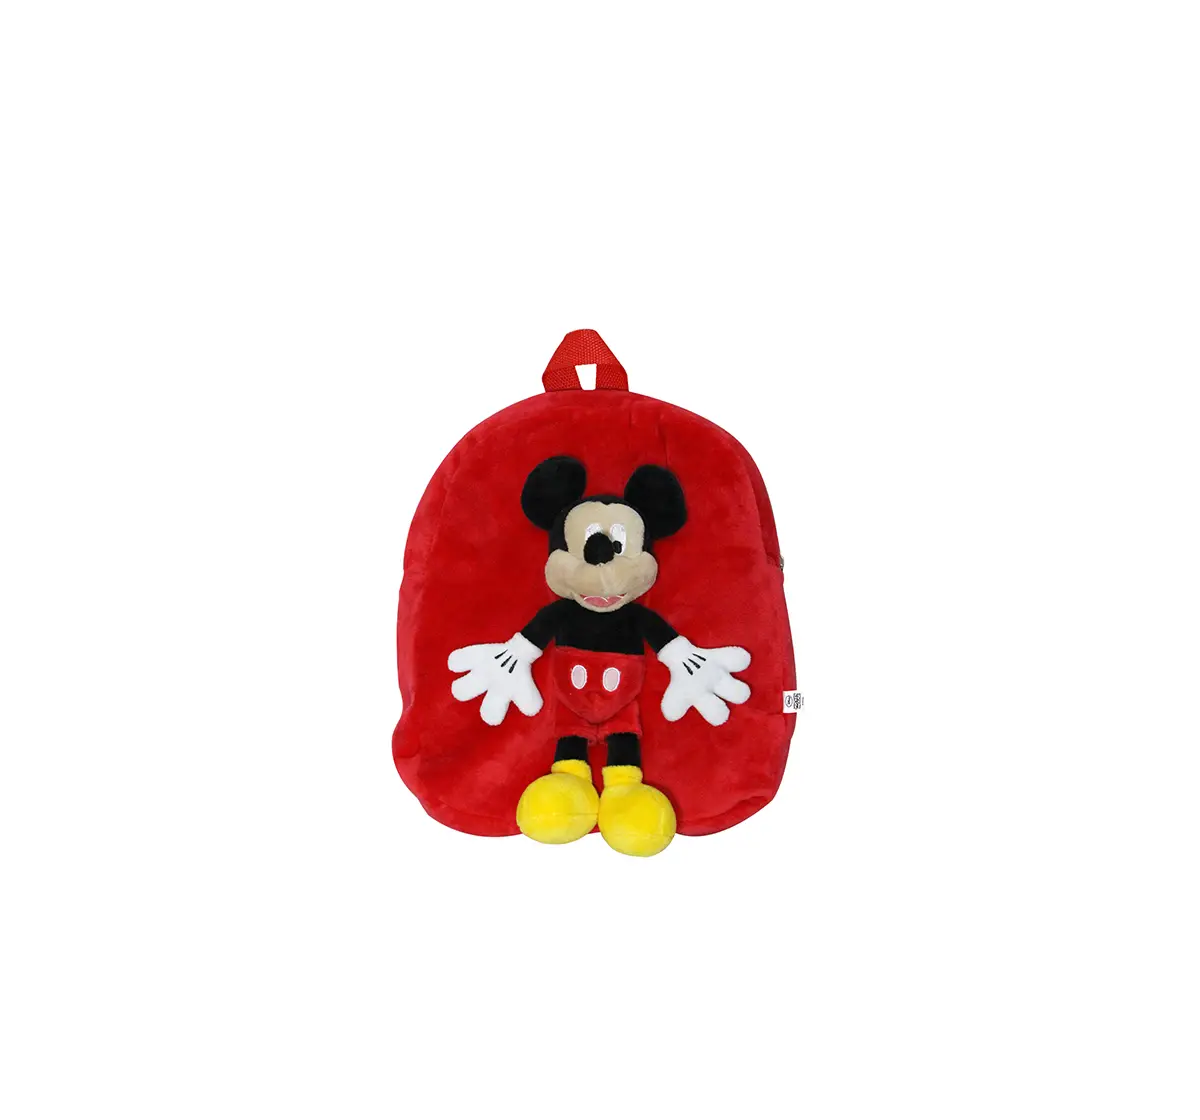 Disney Happiness Minnie Backpack_Pink_Free Size Plush Accessories for Kids age 12M+ - 30.48 Cm 